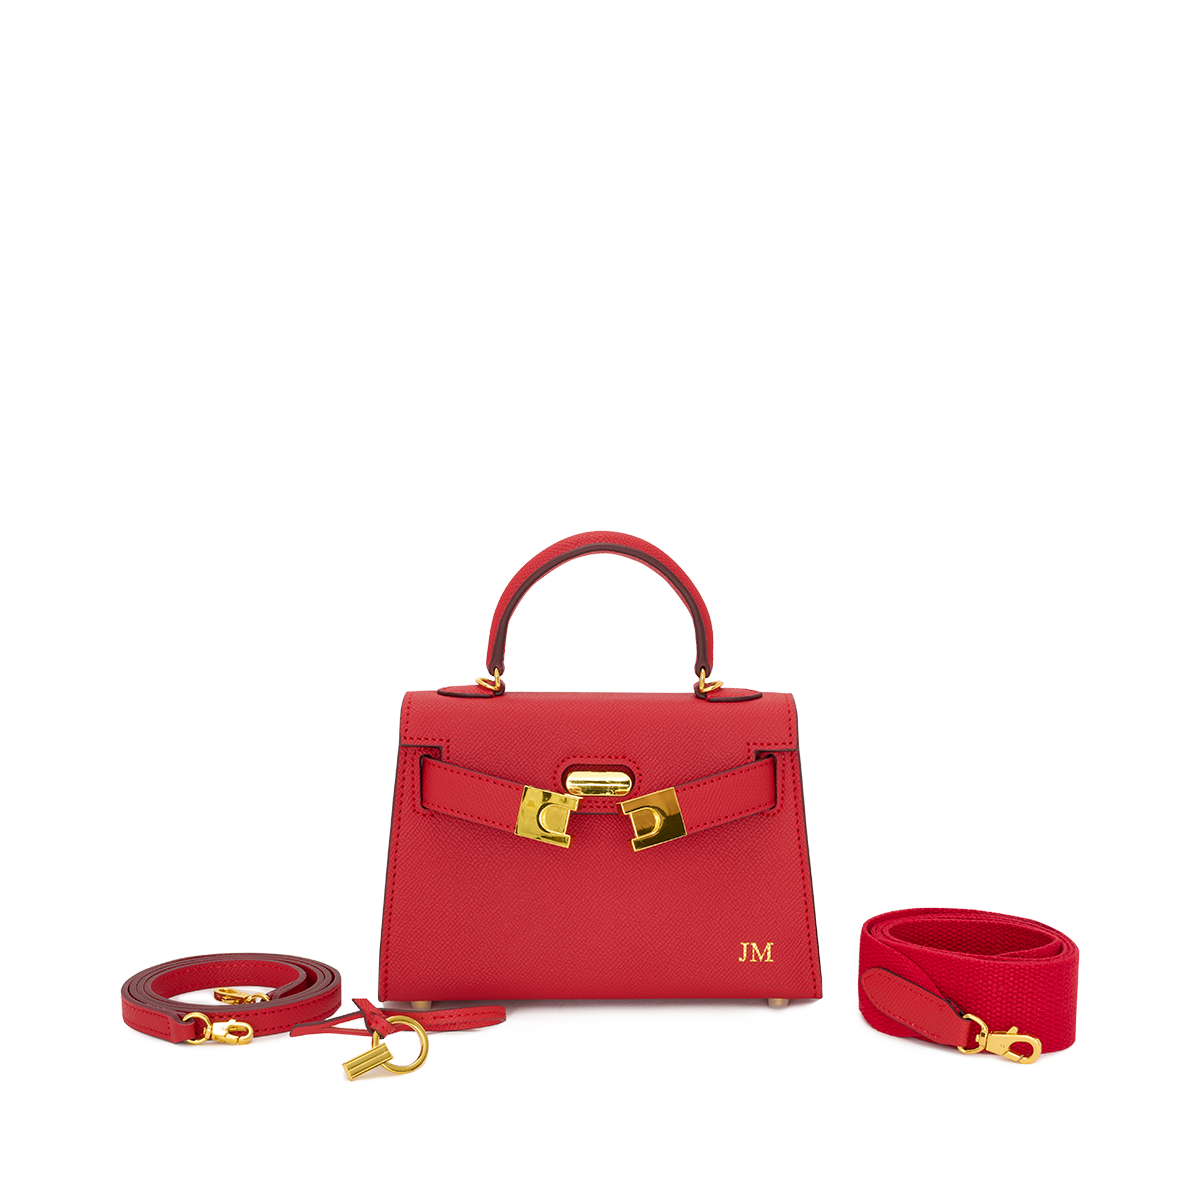 Lily and Bean Evie Leather Bag Red